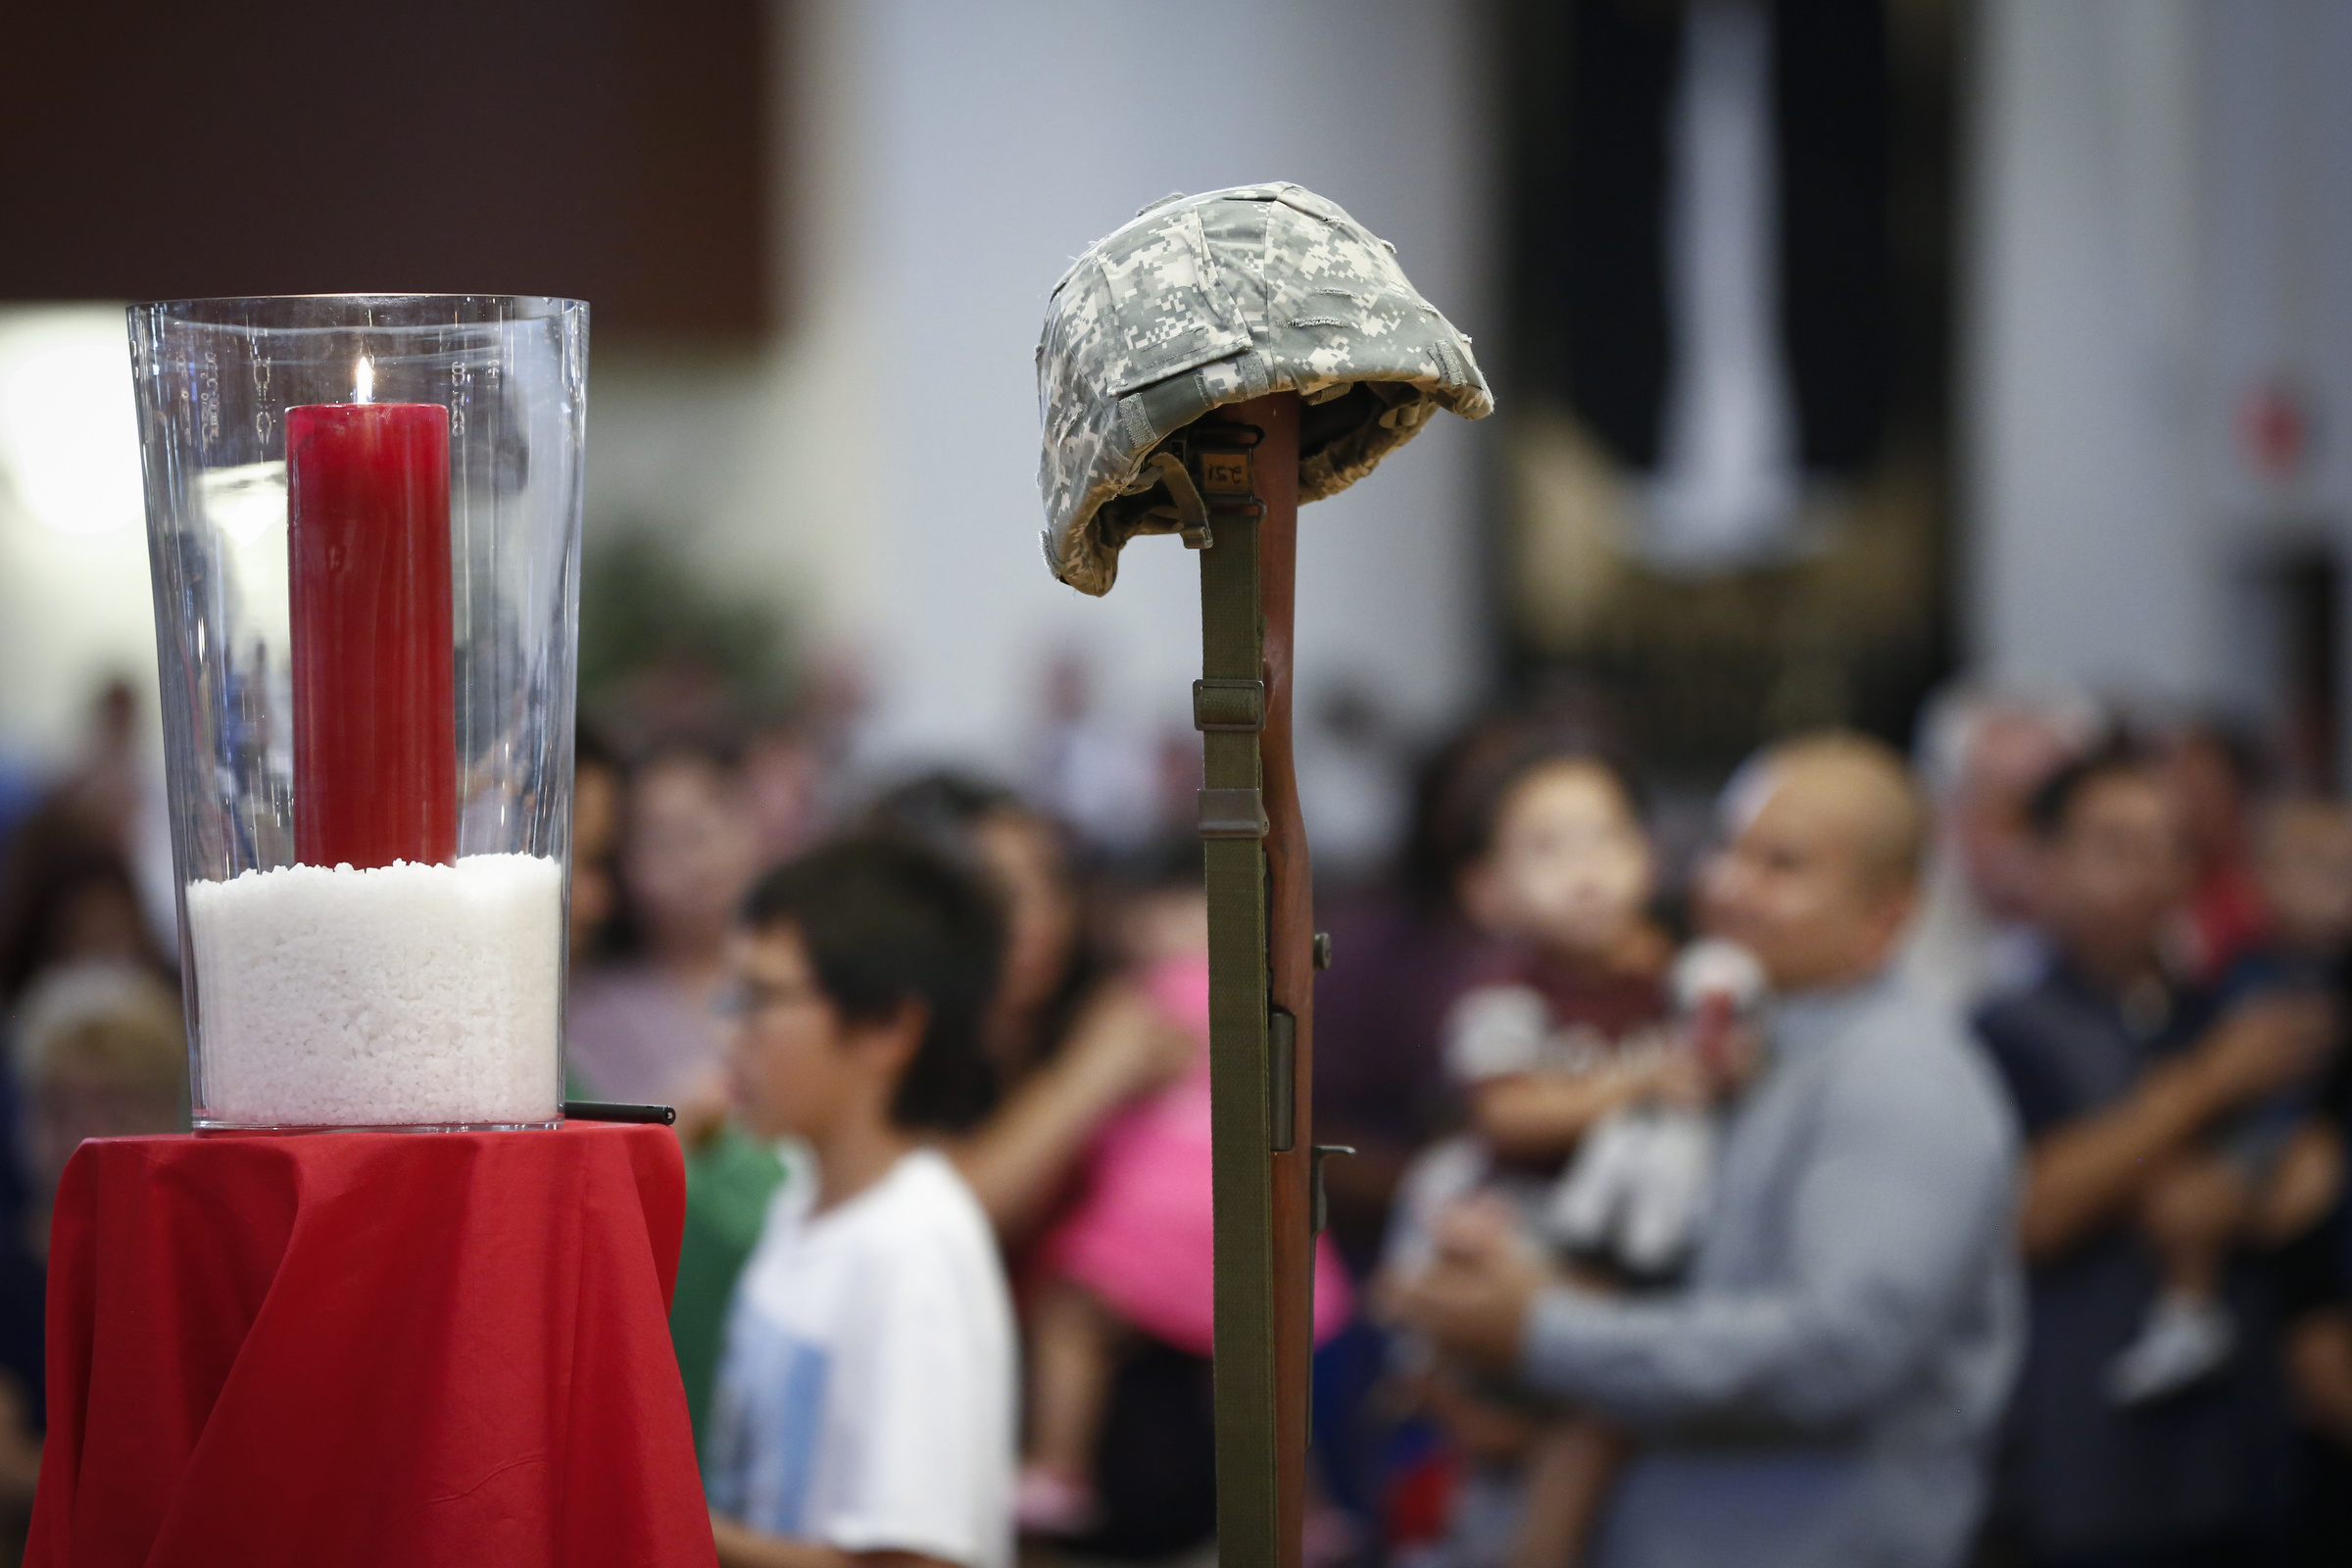 A military helmet rests on a rifle during the sixth annual Red, White and Blue Mass at St. Thomas Aquinas Church in Avondale, Ariz., Nov. 6. During the Mass, the Diocese of Phoenix honored active and retired service men and women and those who have died in service to the country. Veterans Day is Nov. 11. (CNS photo/Nancy Wiechec)